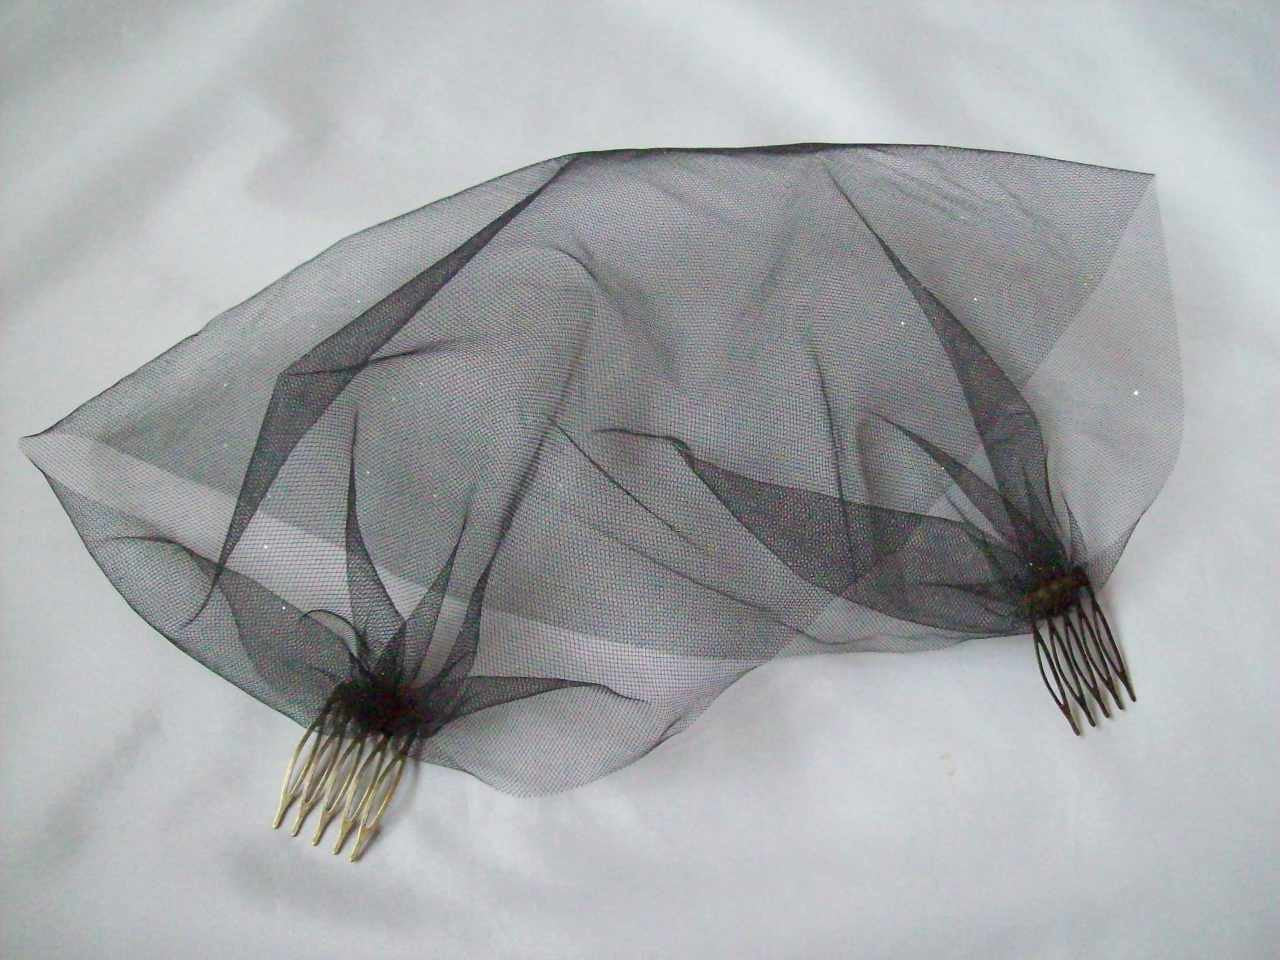 a soft and sheer looking black veil for a bride in a soft tulle netting fabric wider so that it covers the face with small silver or antique bronze metal combs on either end to fix in the hair at the side